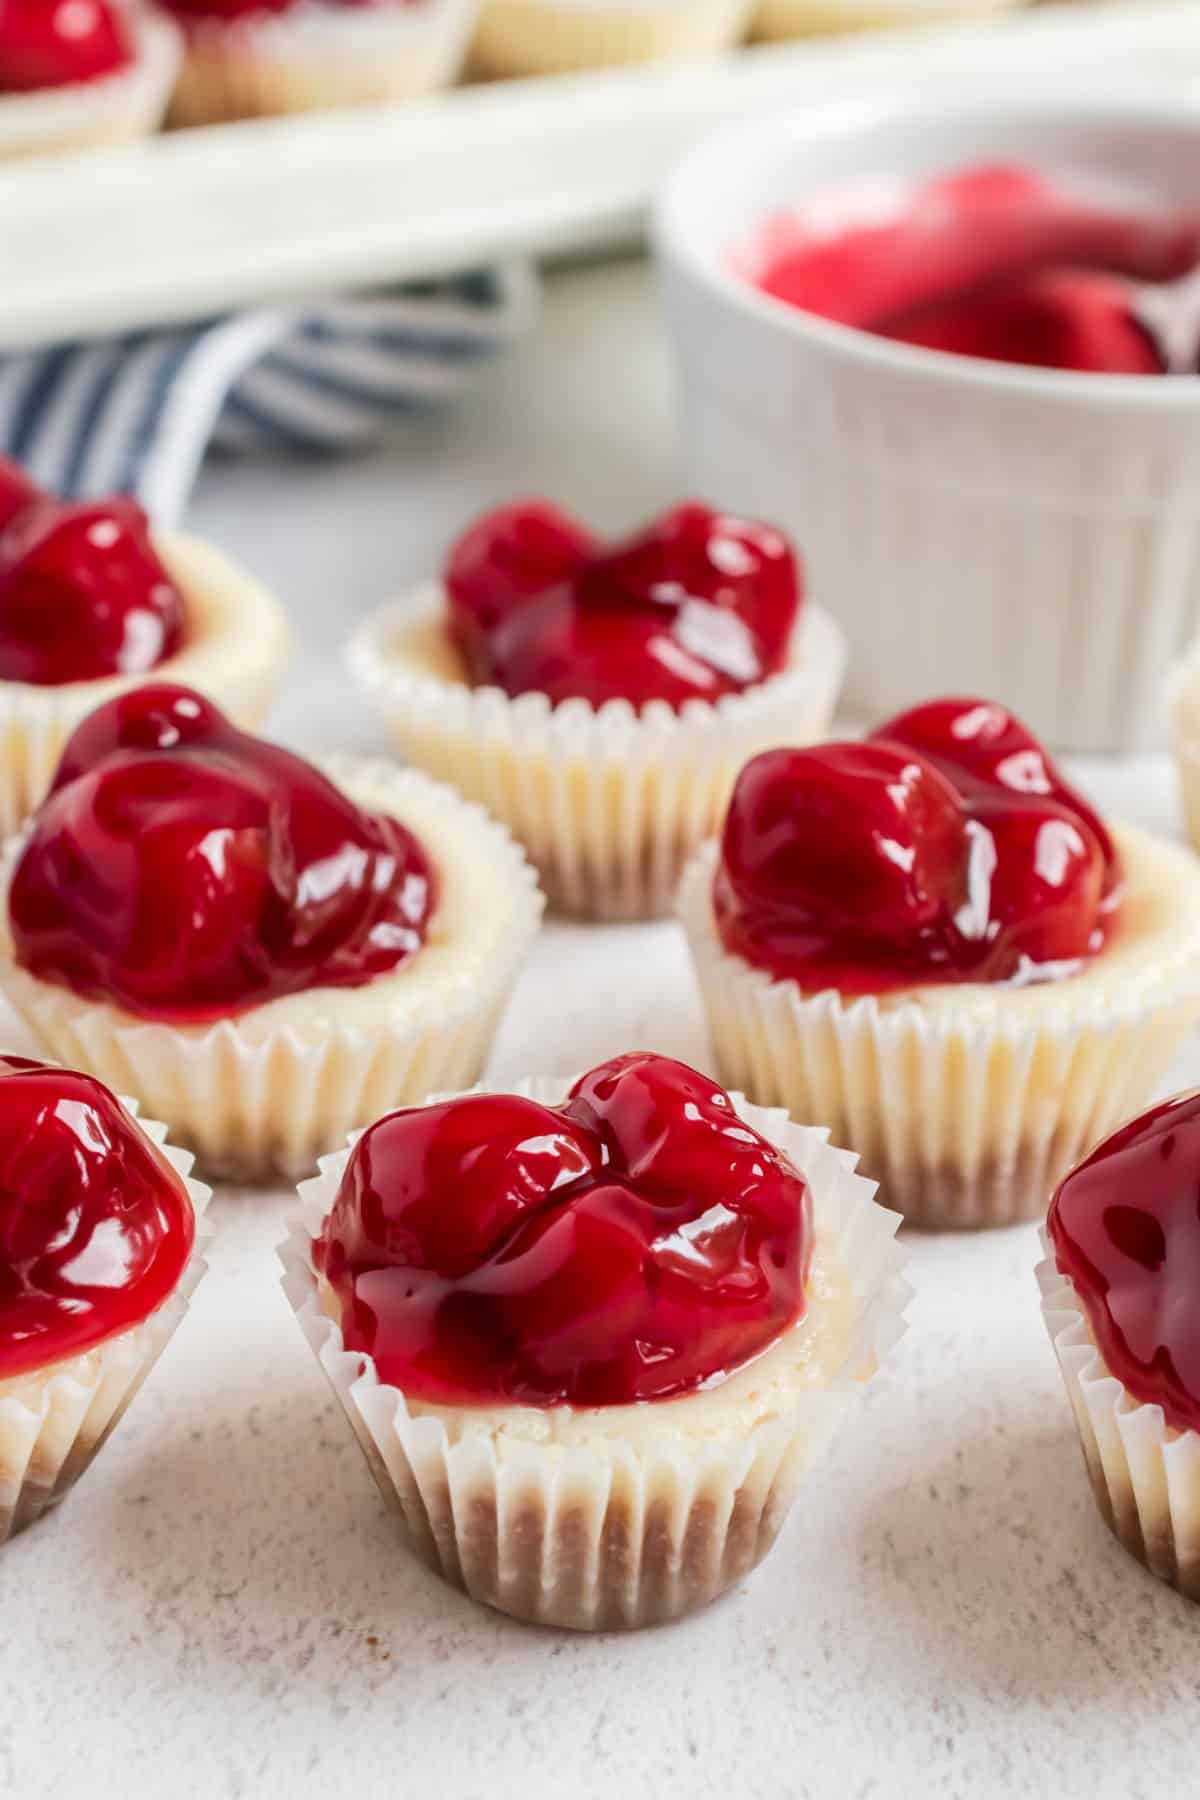 Mini cheesecakes topped with cherry pie filling.